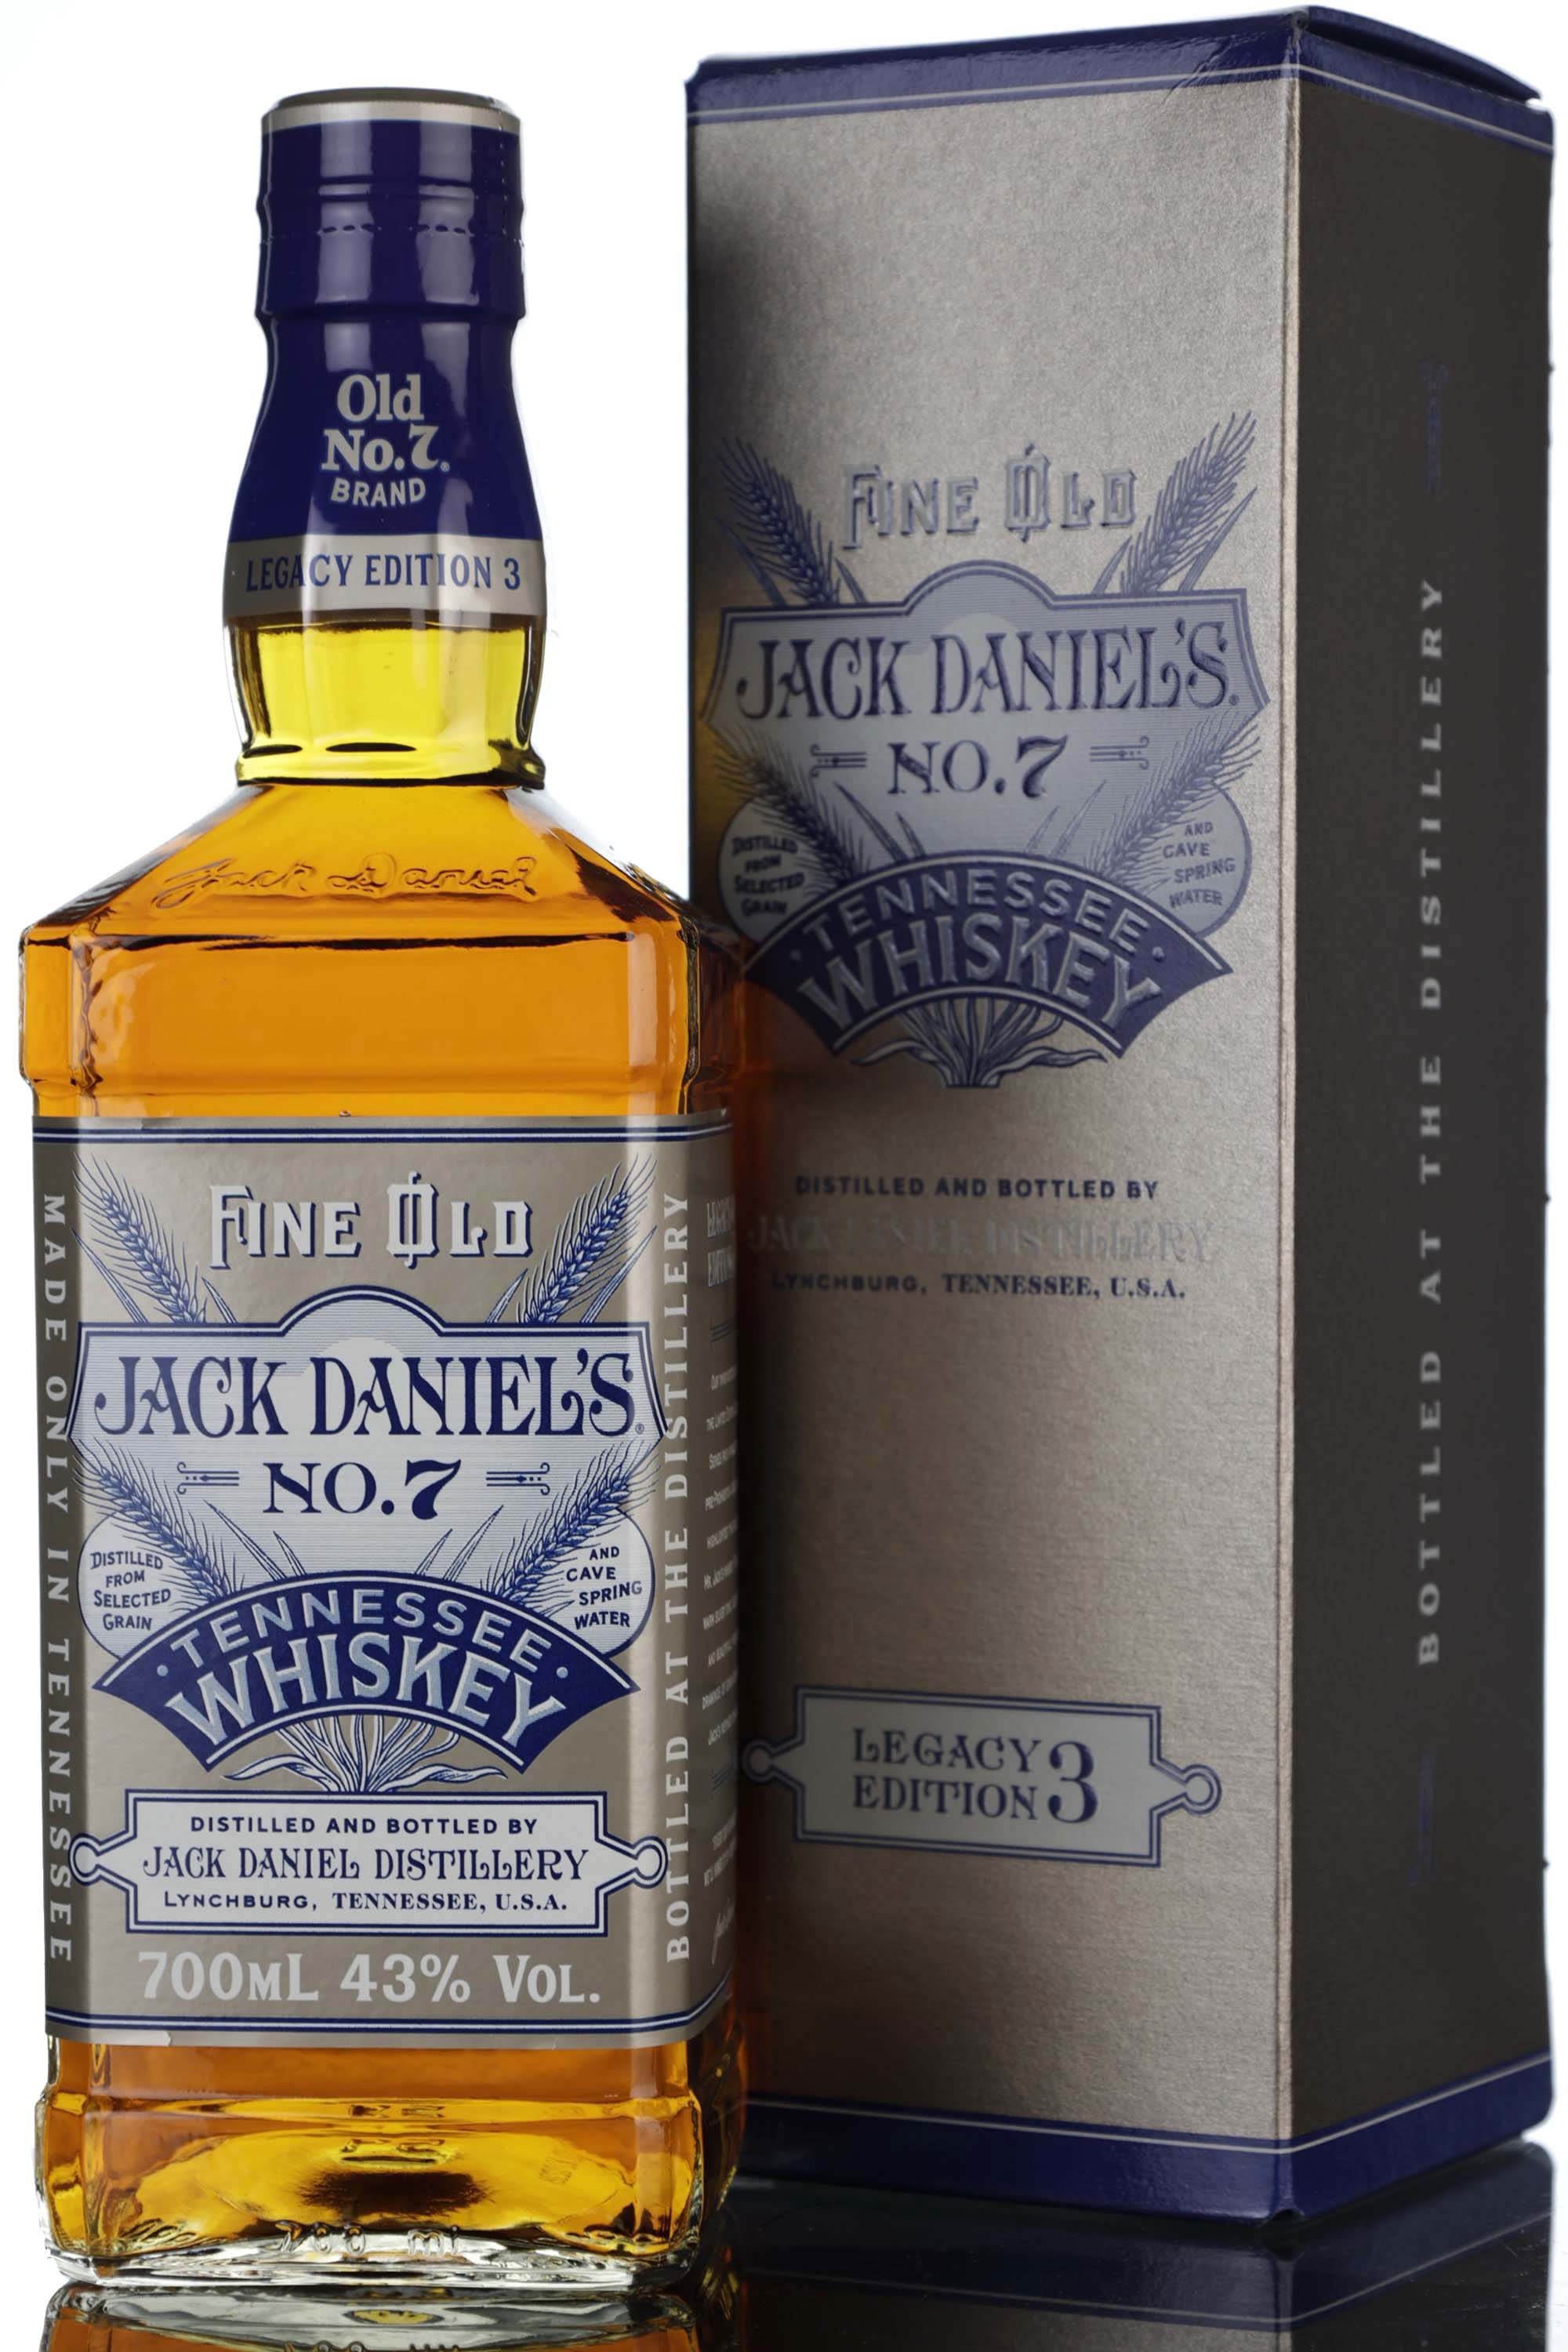 Jack Daniels Old No.7 - Legacy Edition 3 - Fine Old - 2020 Release